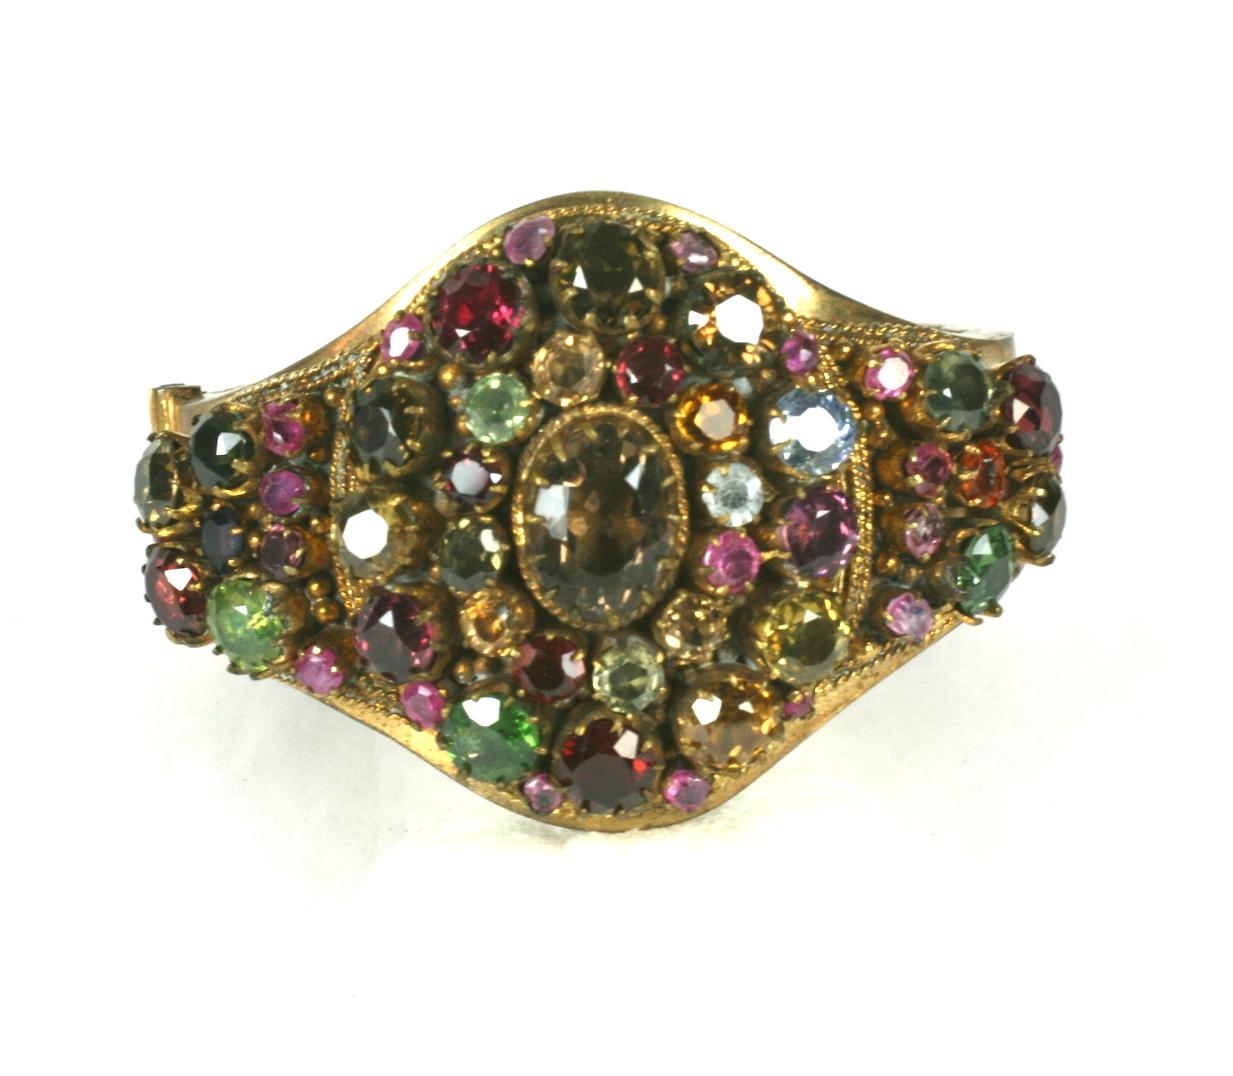 Antique Indian Gem Set Cuff with a colorful array of gemstones mixed with the occasional paste. 
All the stones appear to have foil inserted underneath the settings to magnify the reflection of the gem colors.
A wonderful selection of color stones